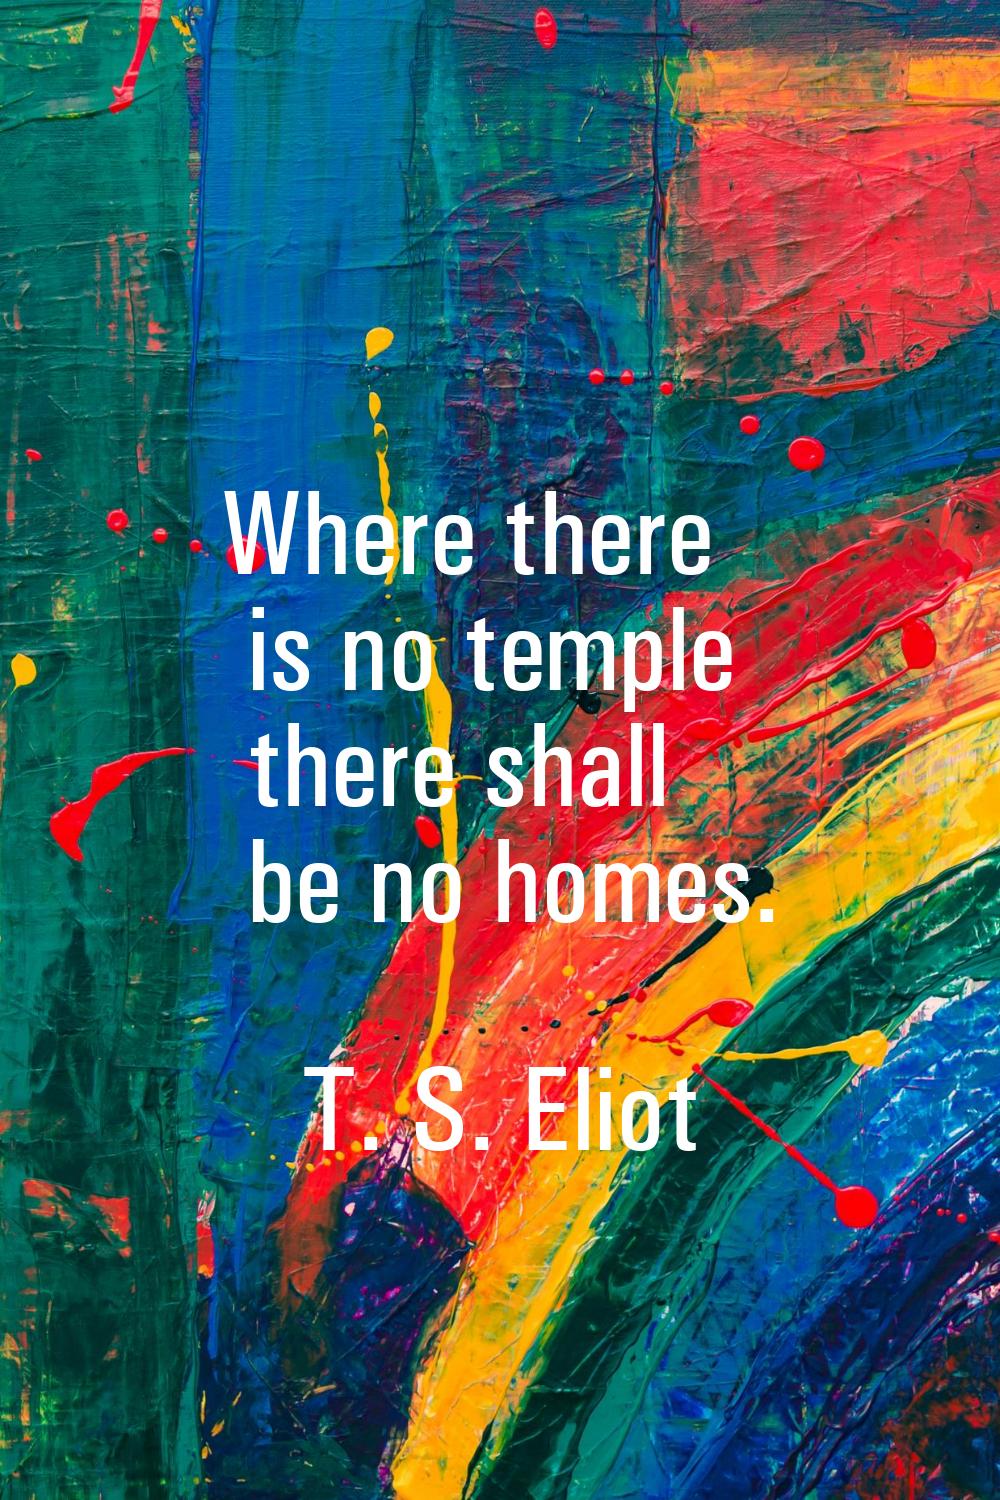 Where there is no temple there shall be no homes.